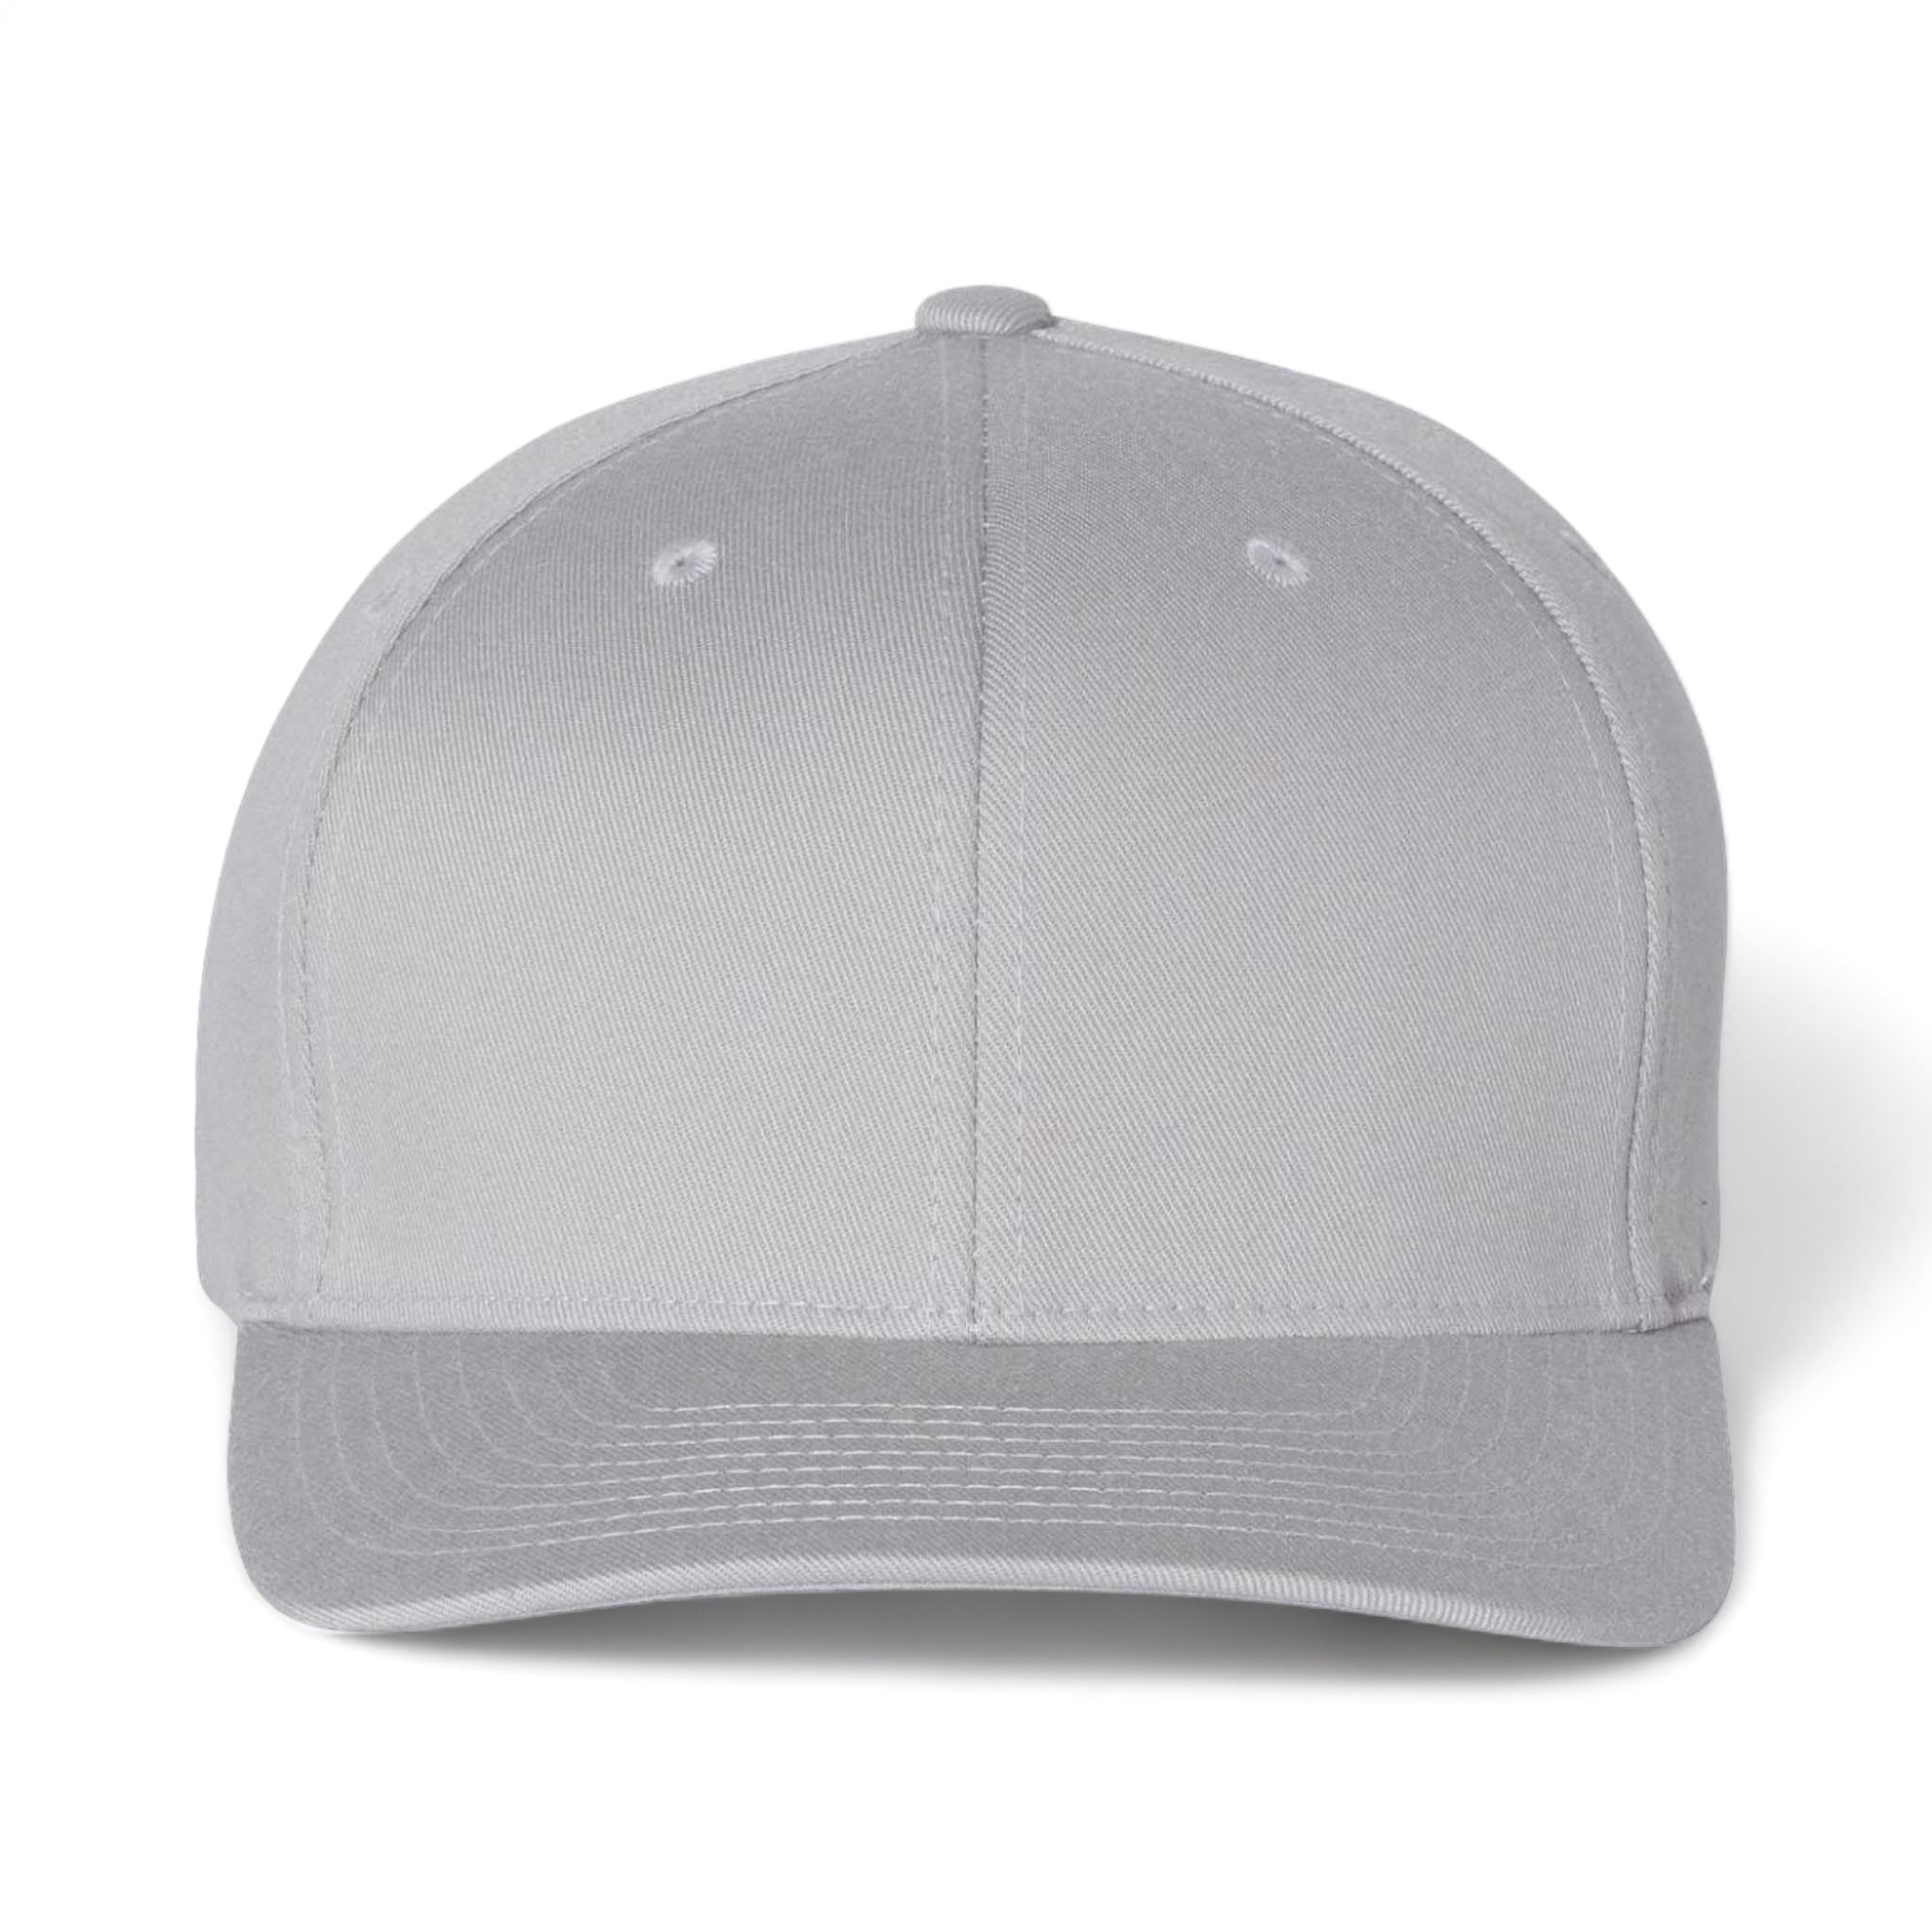 Front view of Flexfit 6277 custom hat in silver